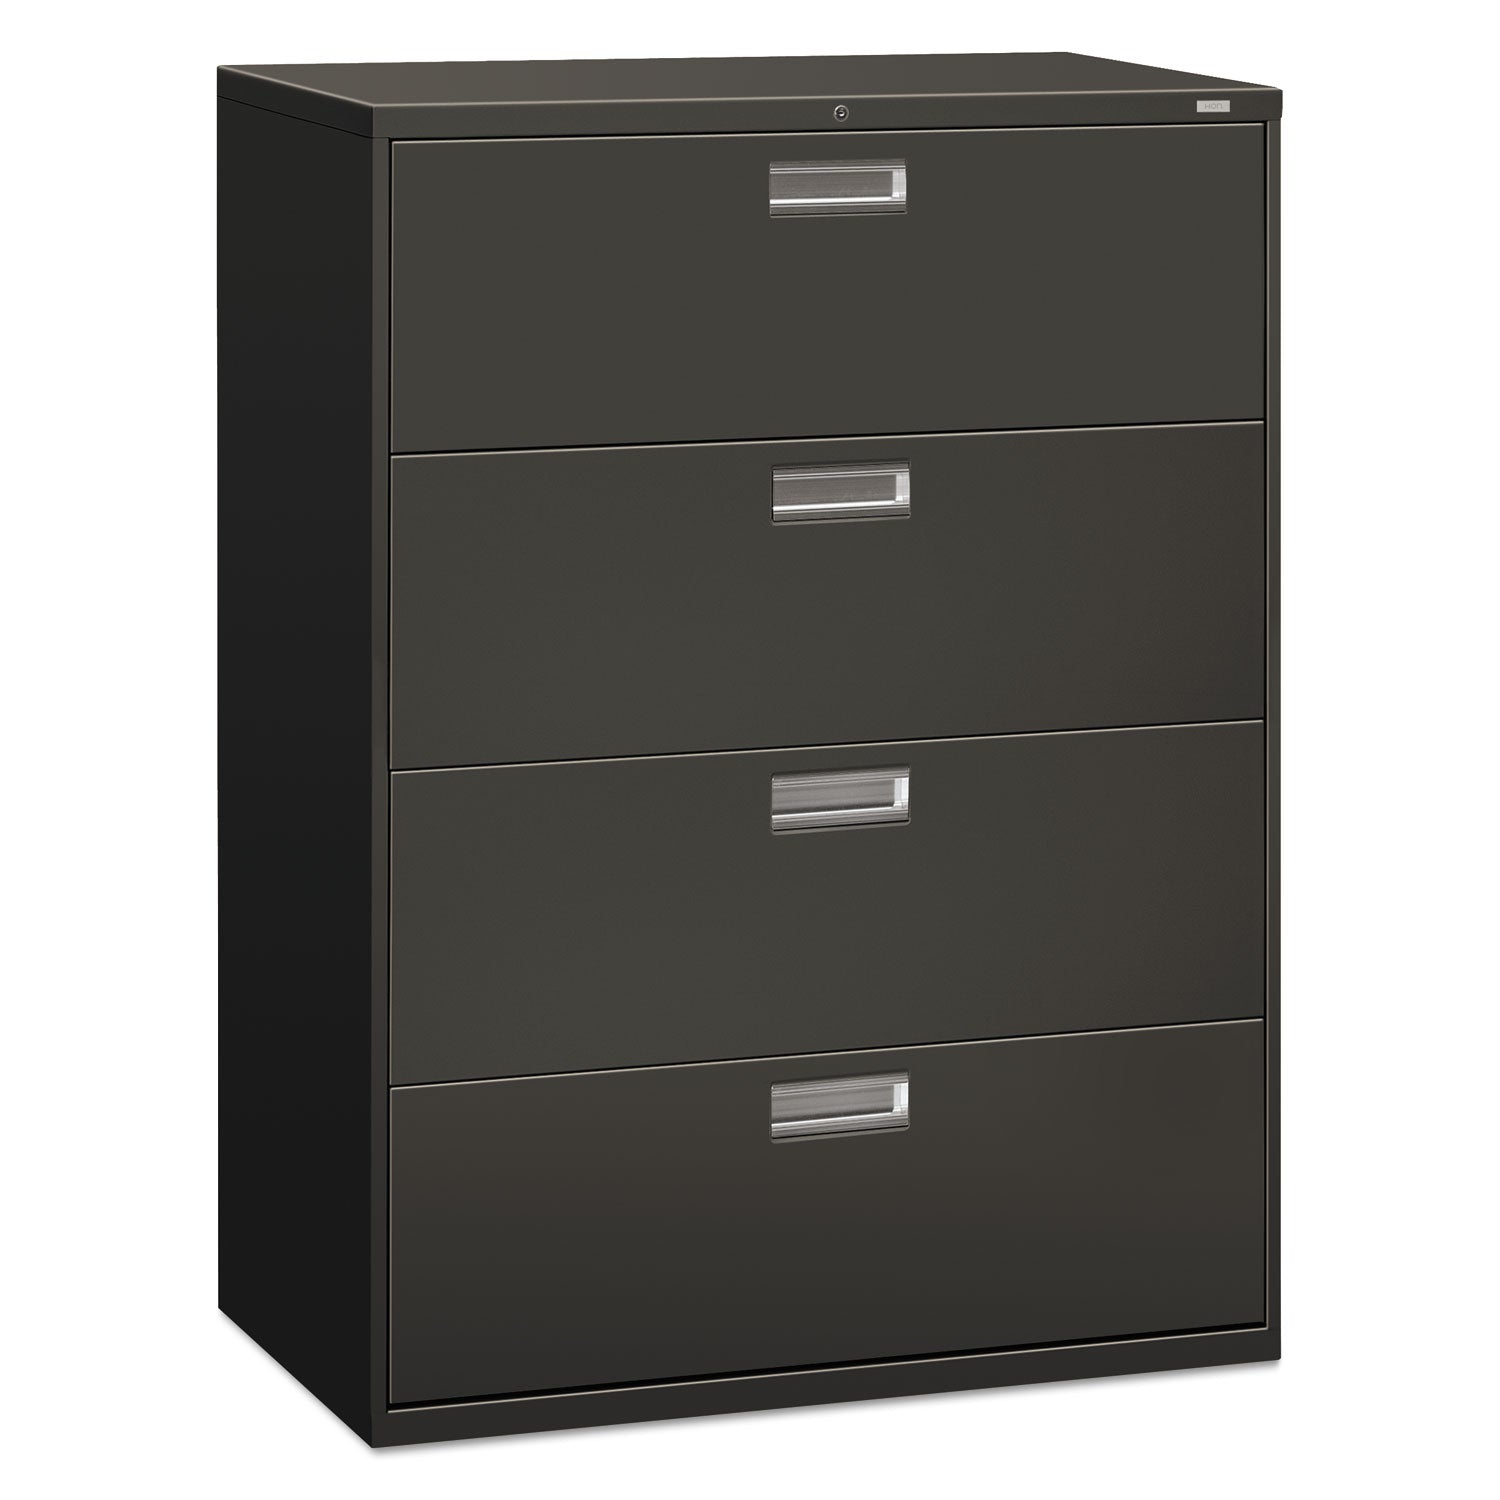 Brigade 600 Series Lateral File, 4 Legal/Letter-Size File Drawers, Charcoal, 42" x 18" x 52.5 - 